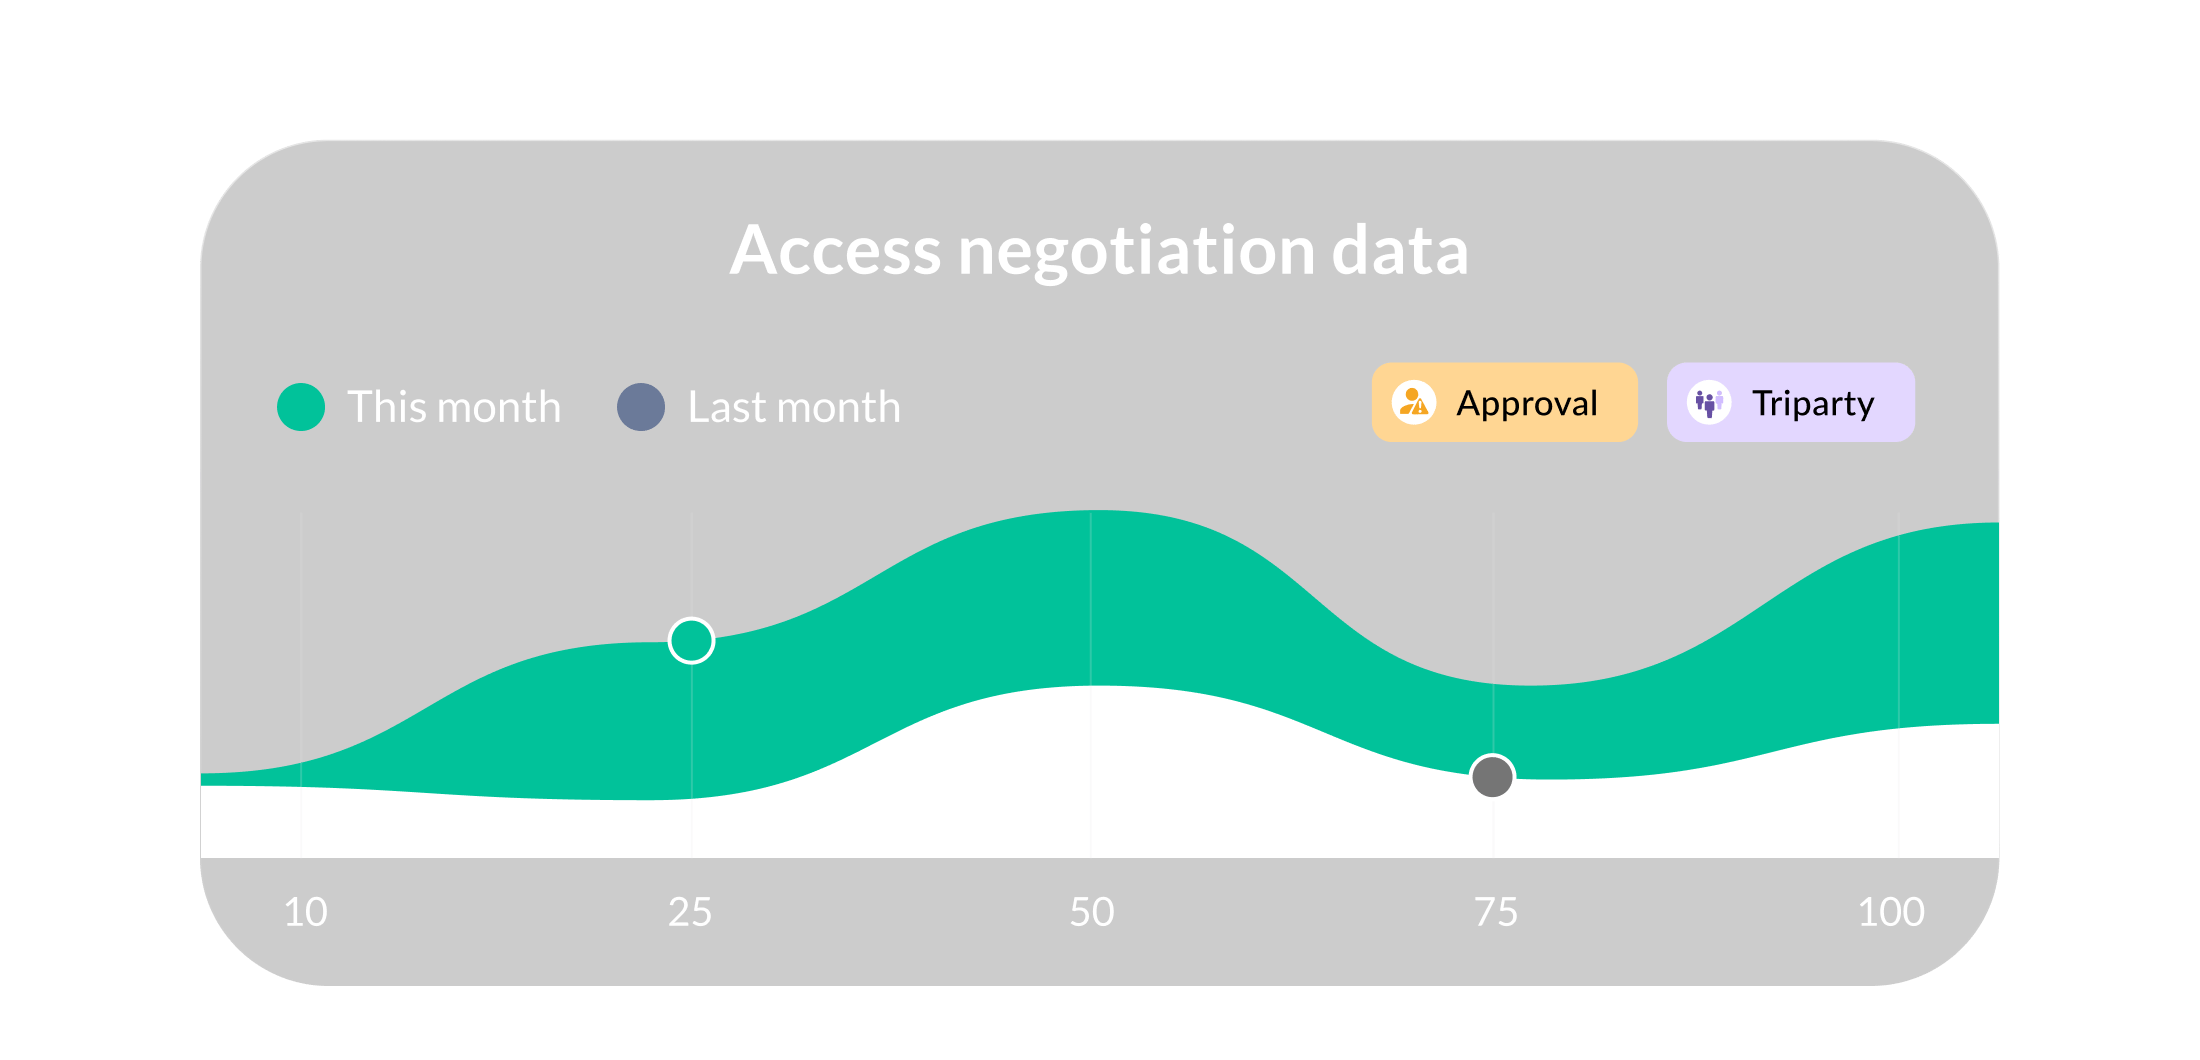 A chart showing access to Negotiation data, comparing this month to last month and with filters for Approval and Triparty